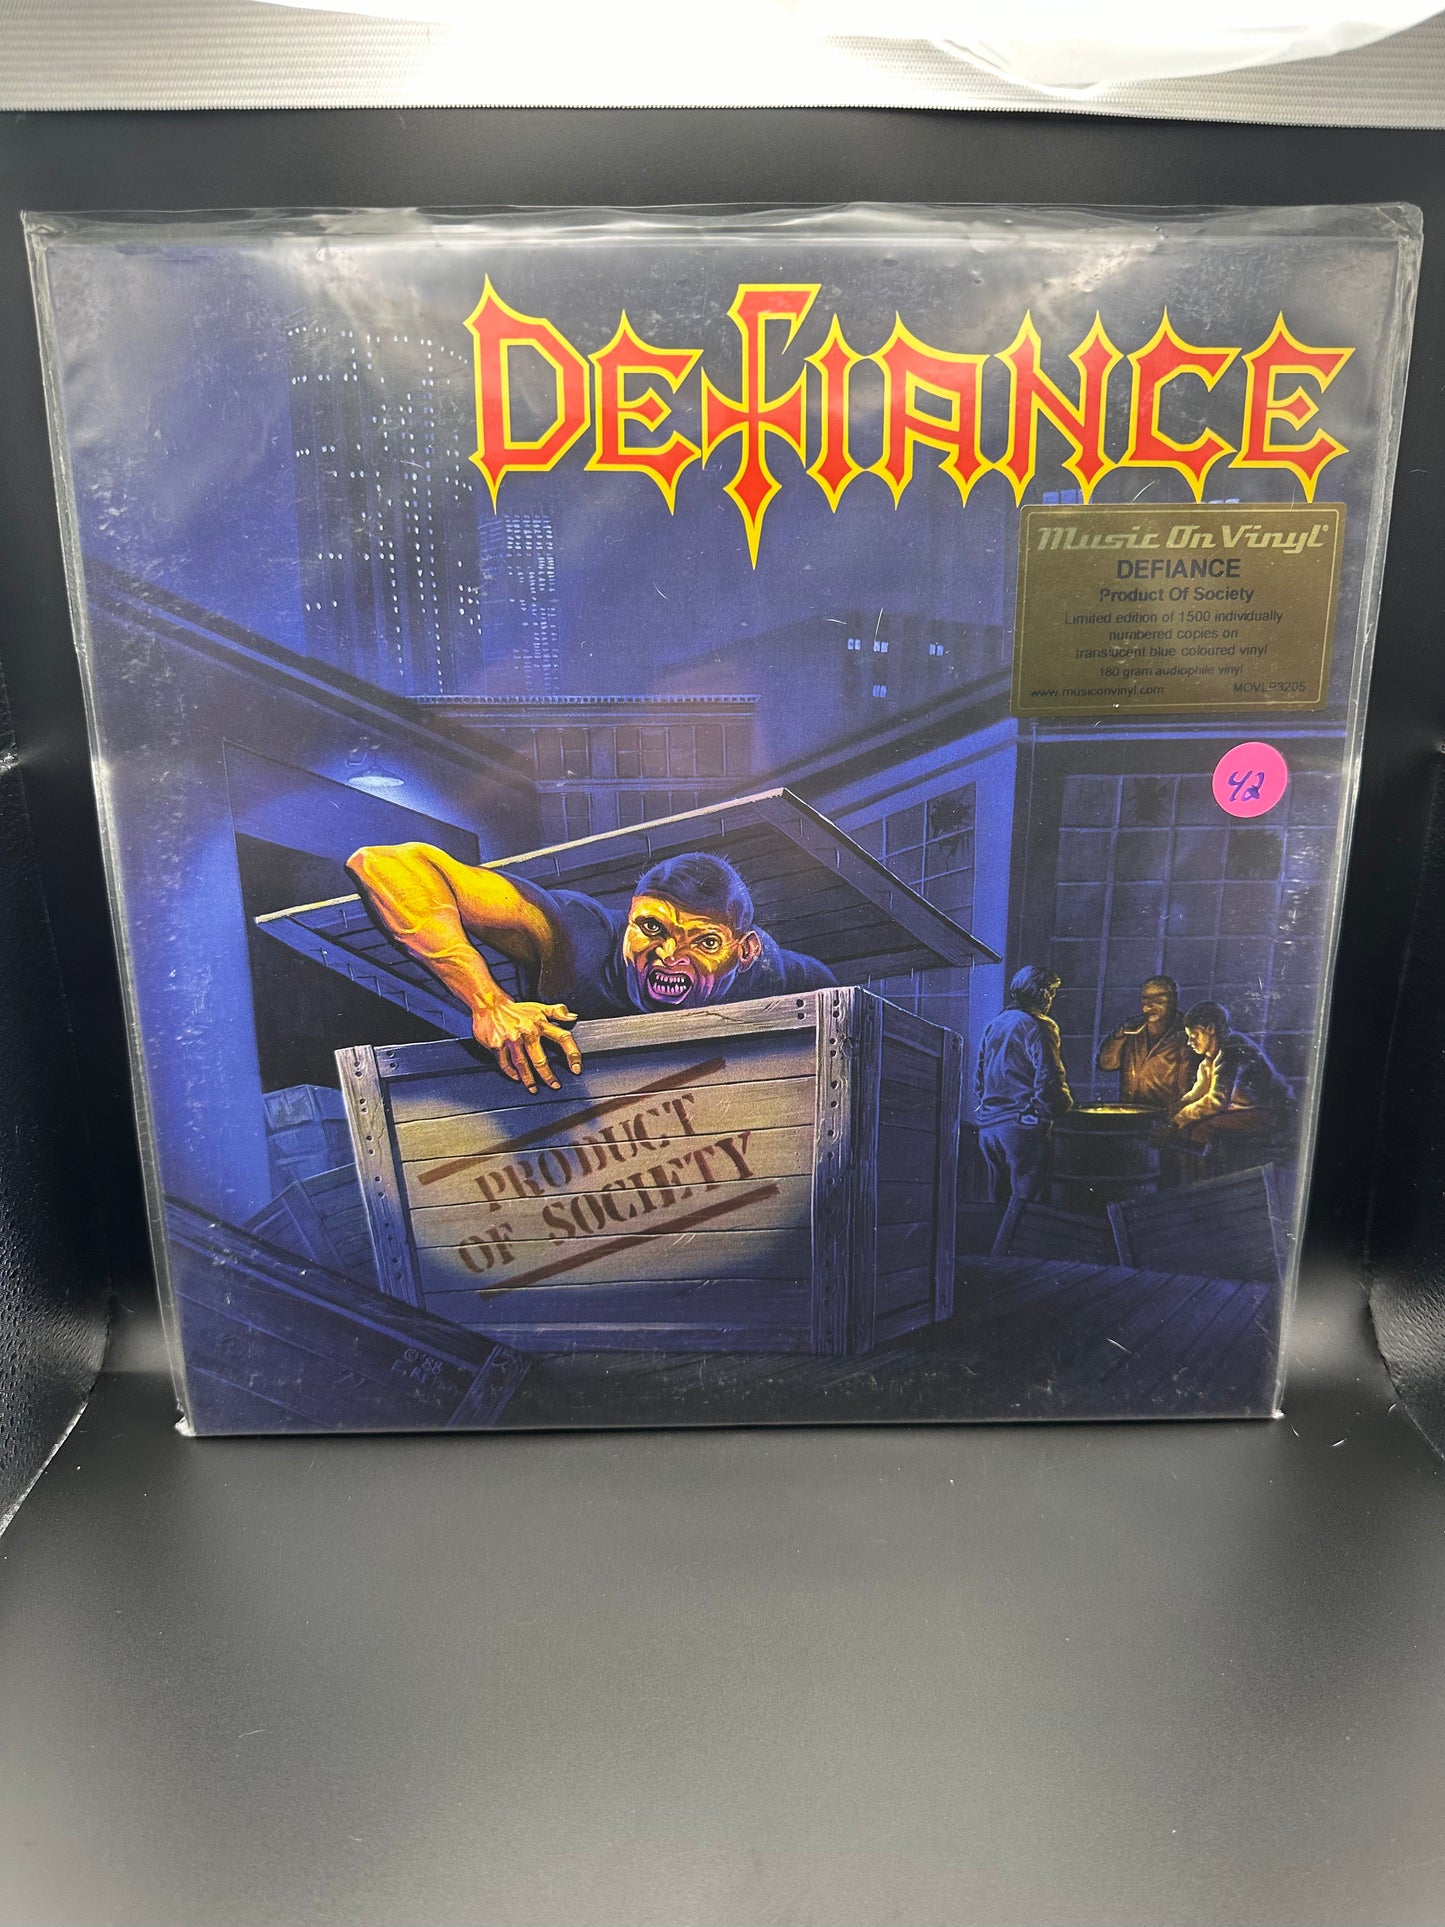 Defiance - Product Of Society (Colored Vinyl)